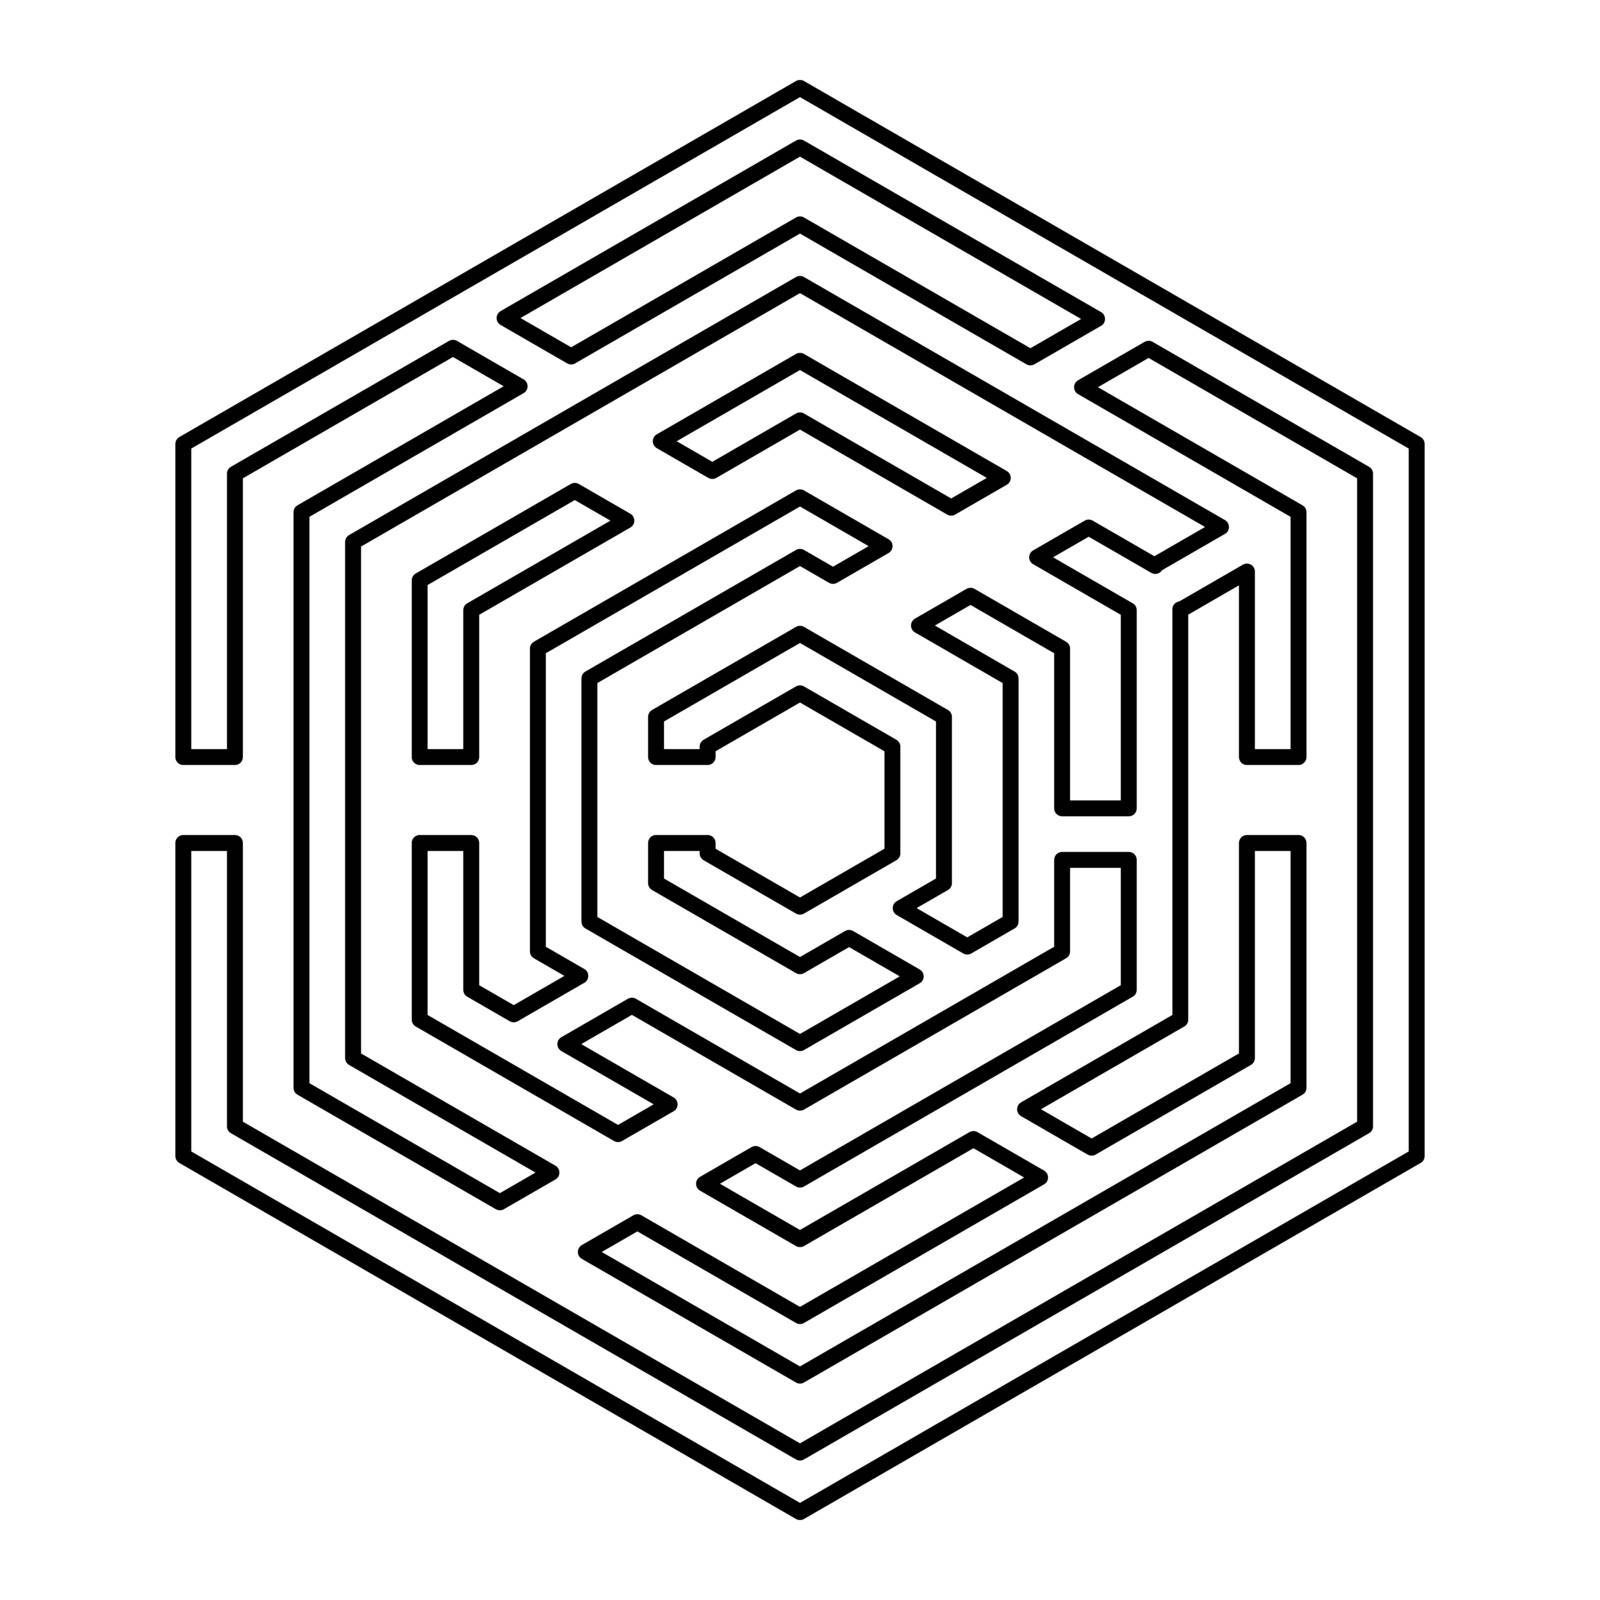 Hexagonal Maze Hexagon maze Labyrinth with six corner icon black color outline vector illustration flat style image by serhii435